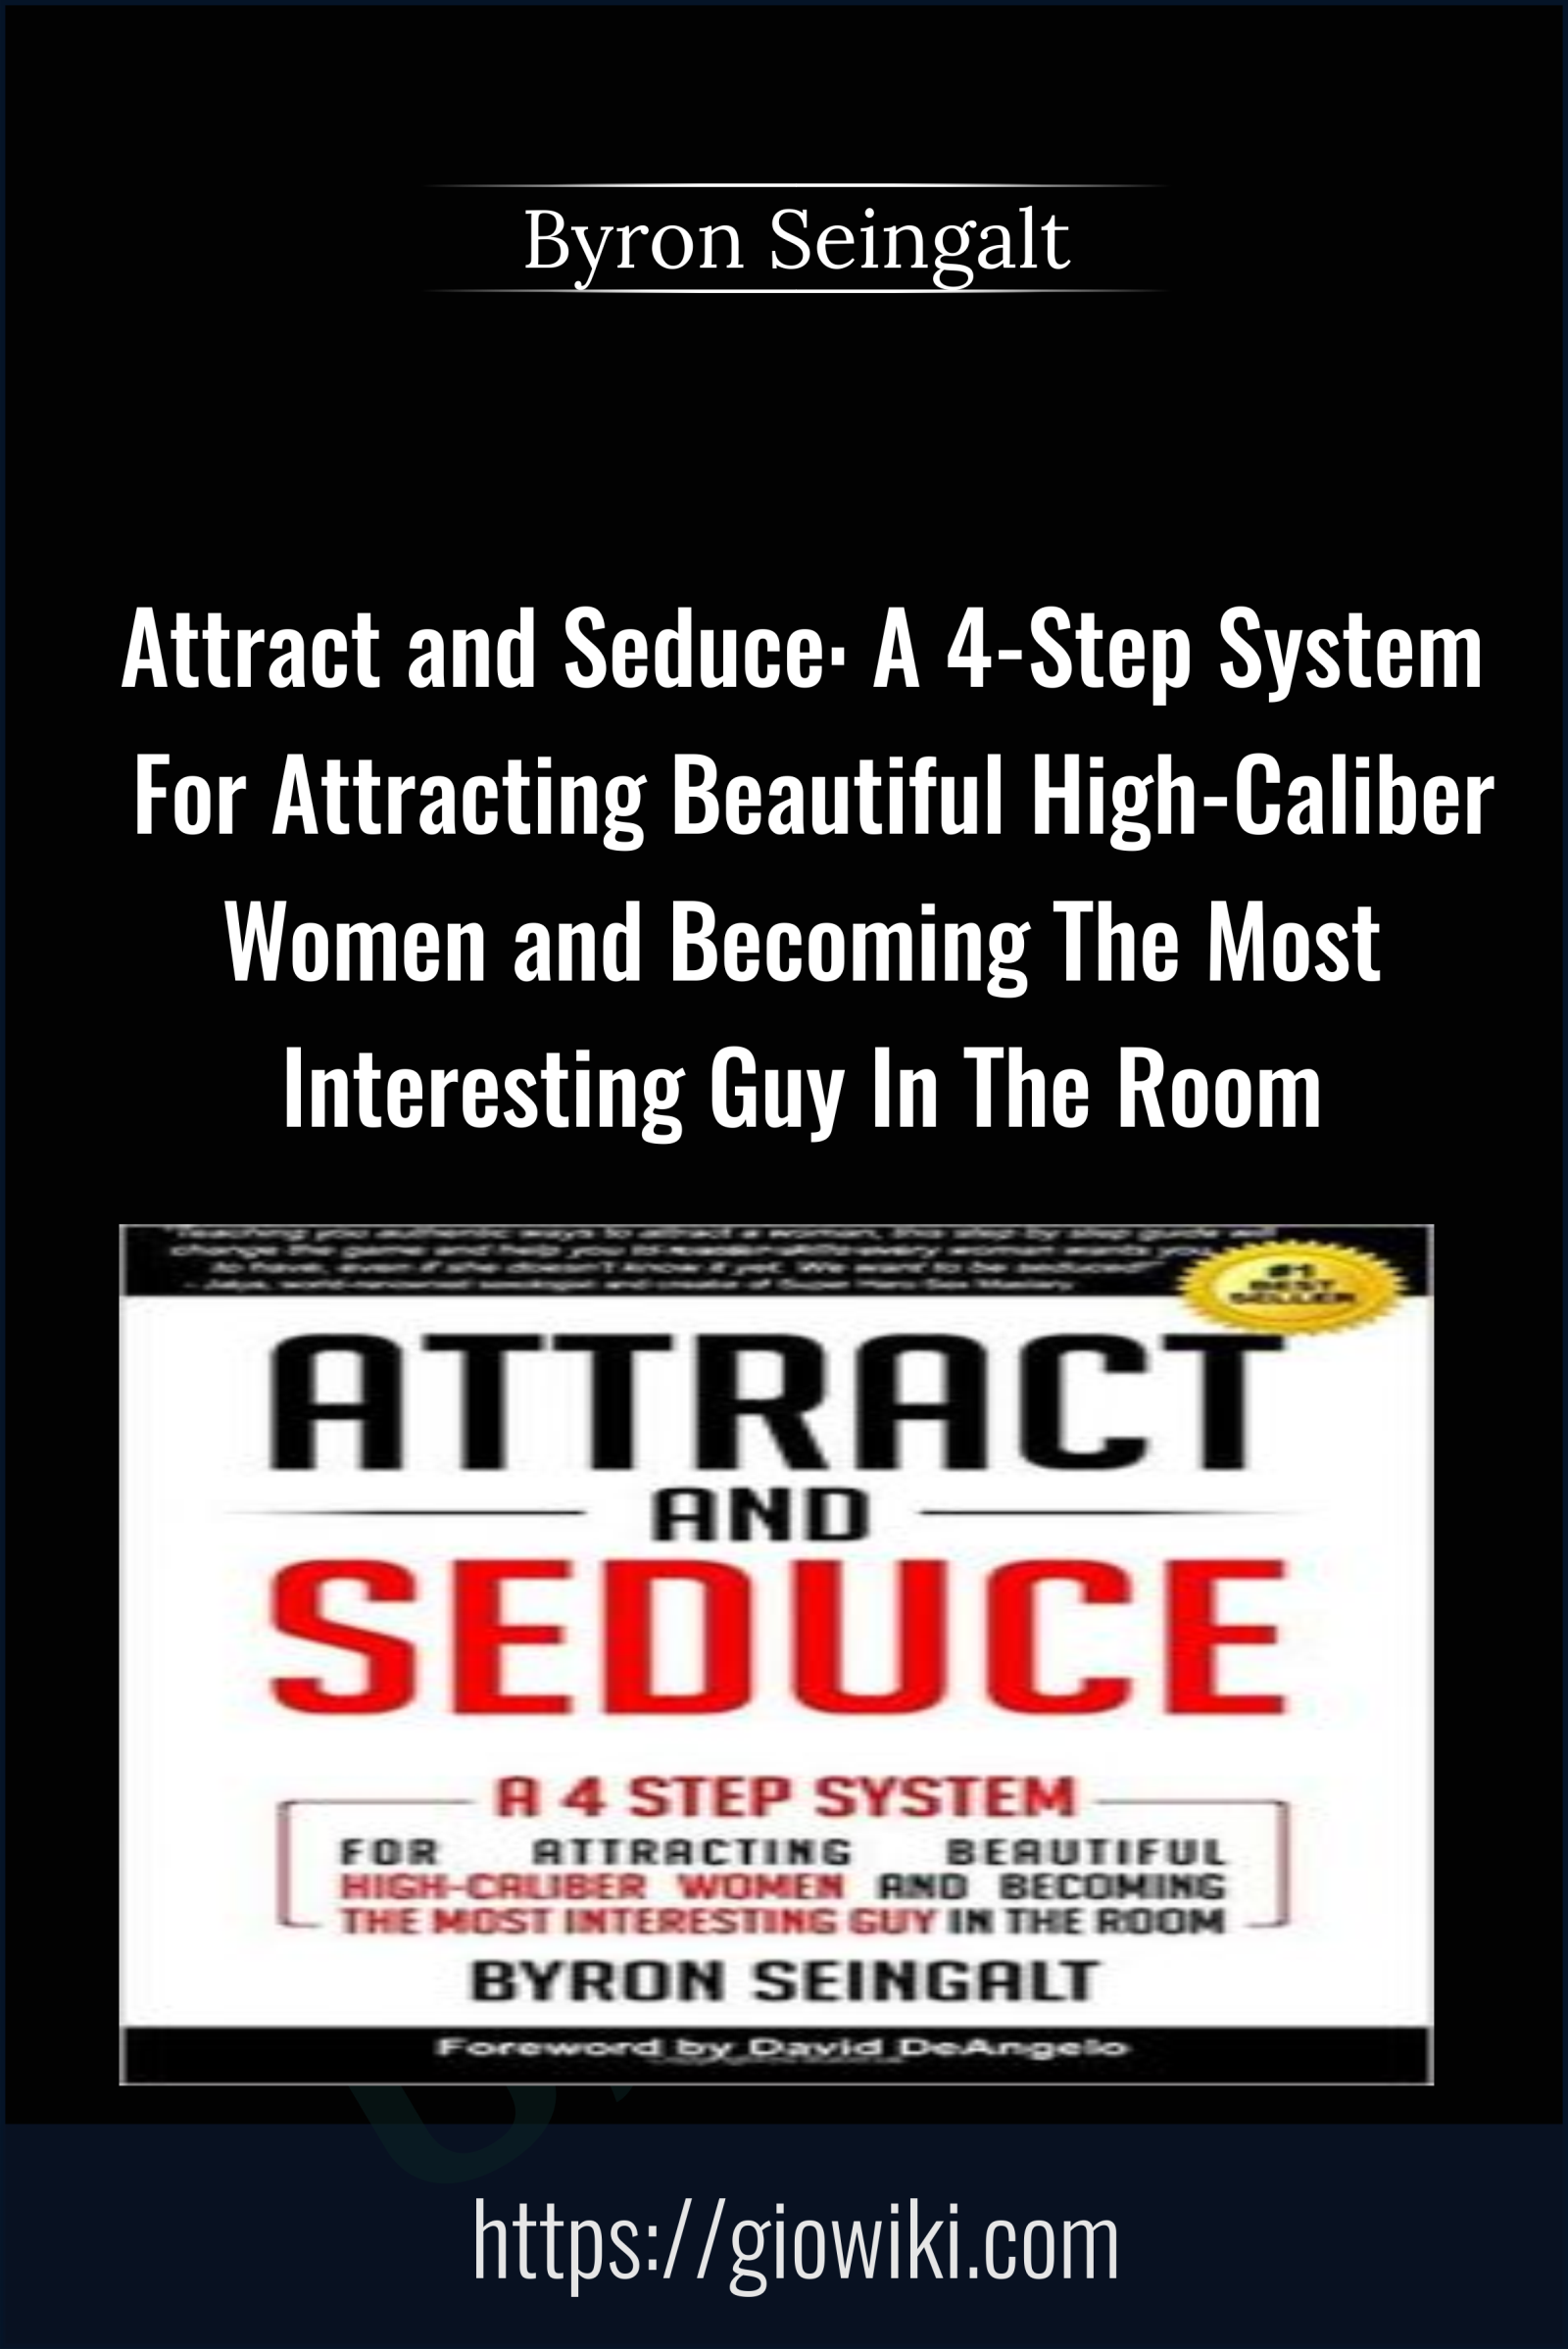 Attract and Seduce: A 4-Step System For Attracting Beautiful High-Caliber Women and Becoming The Most Interesting Guy In The Room (Attraction and Seduction For Men and Women) - Byron Seingalt